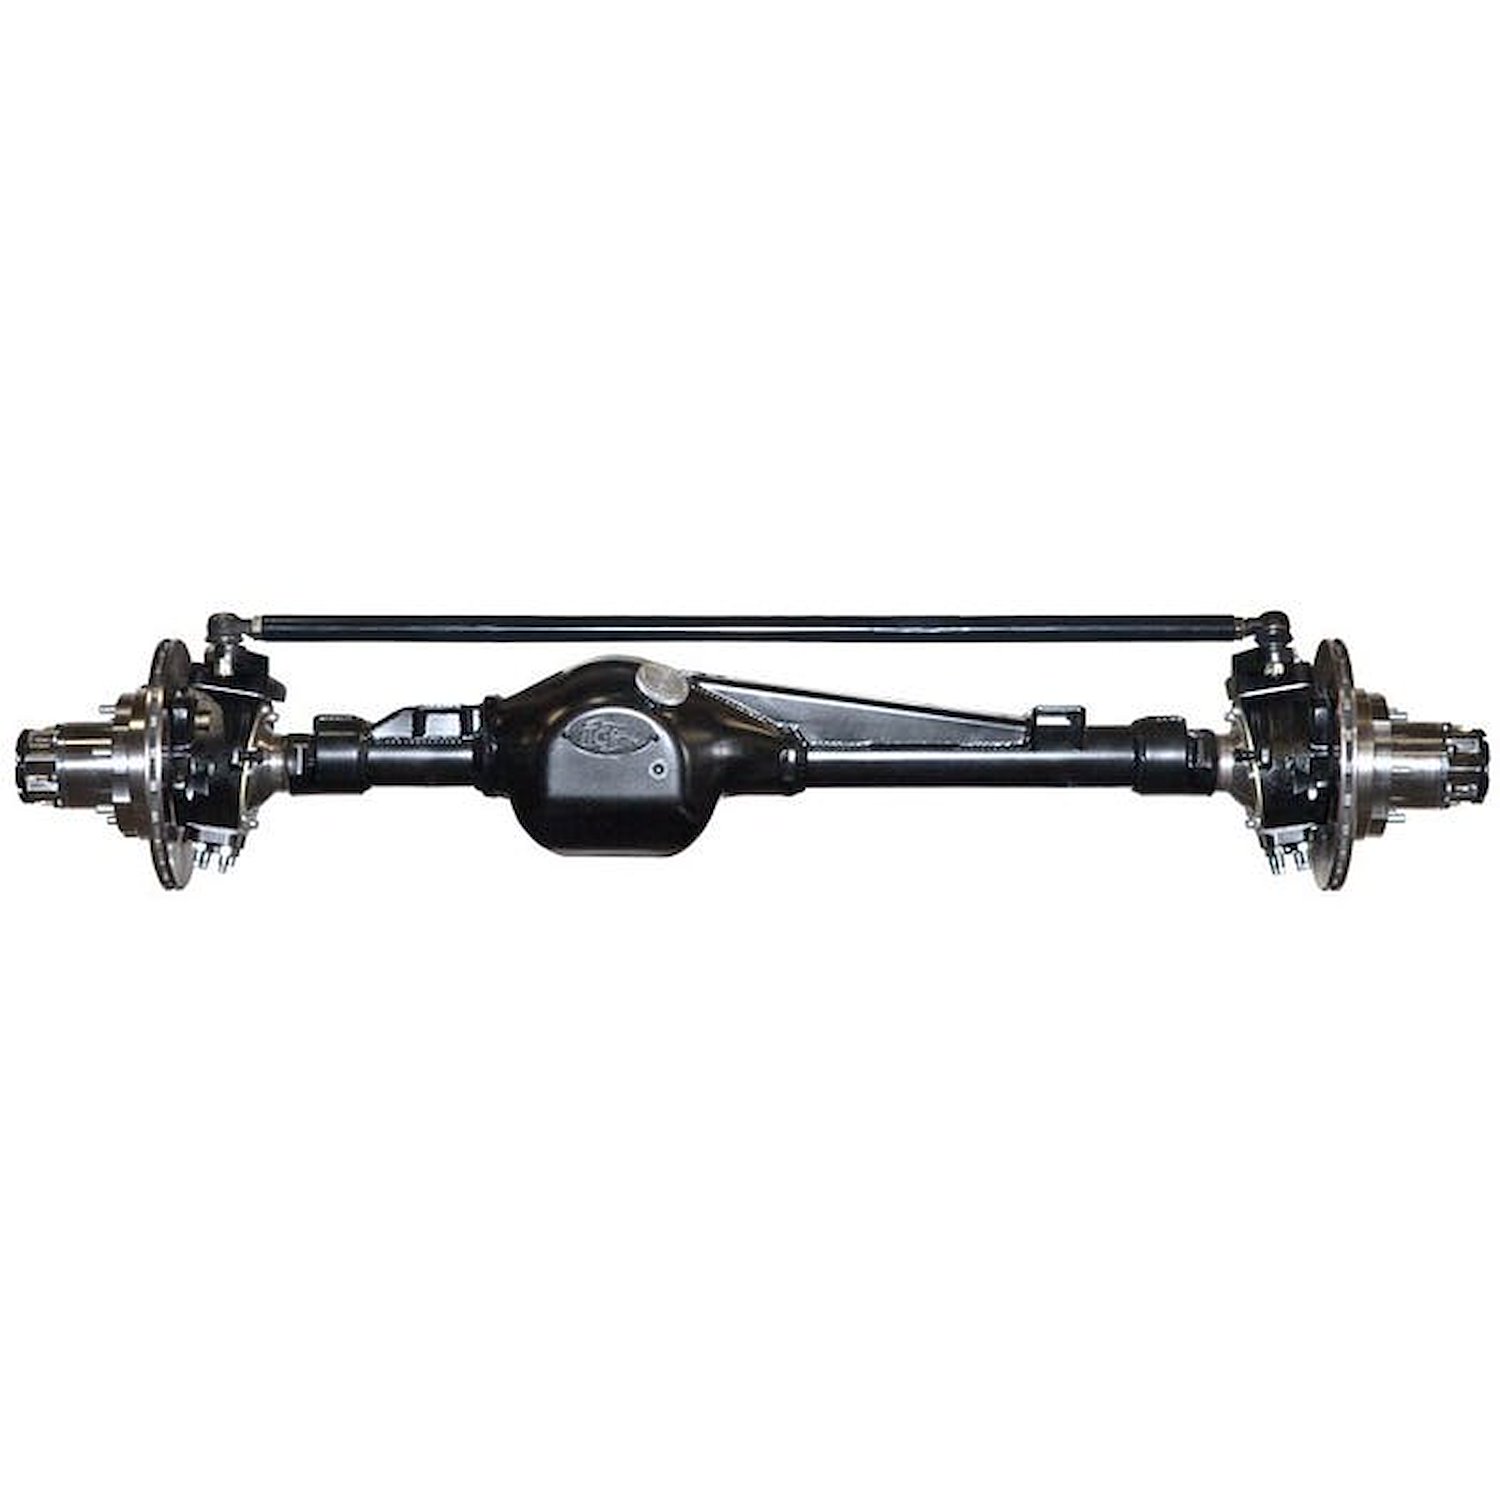 301658-1-KIT Rock Assault Fully-Built Front Axles, +5 Width, RHD, High-Pinion, 4.88, Grizzly, Creeper Flanges, Toyota